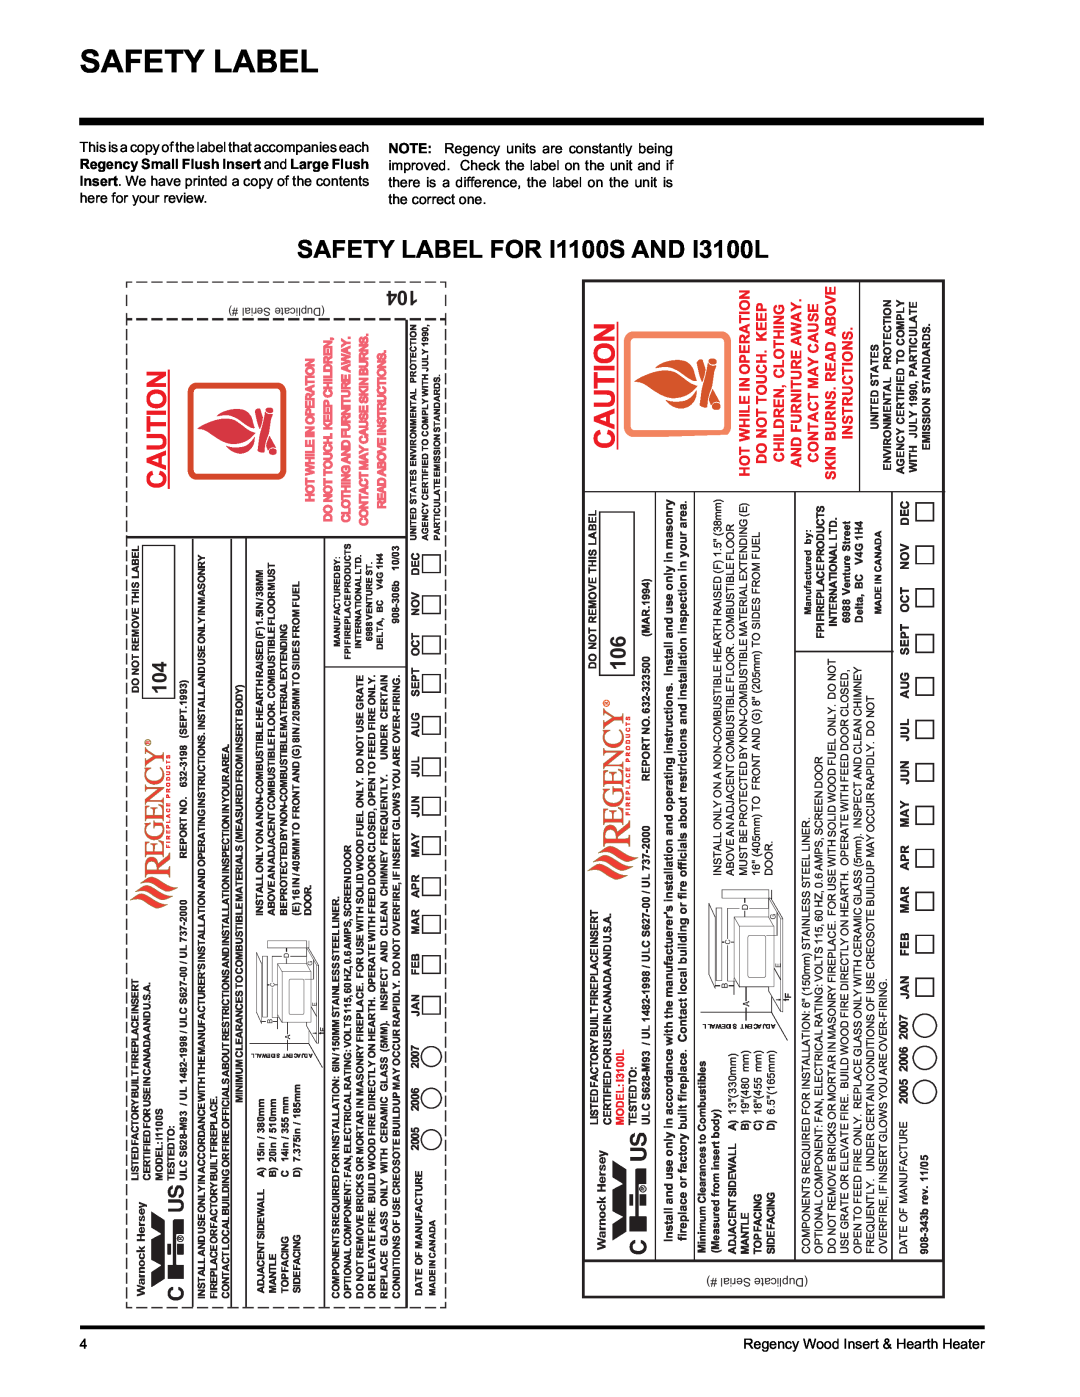 Regency Safety Label, I3100L, SAFETY LABEL FORI1100S, Hot While In Operation, Do Not Touch. Keep Children 